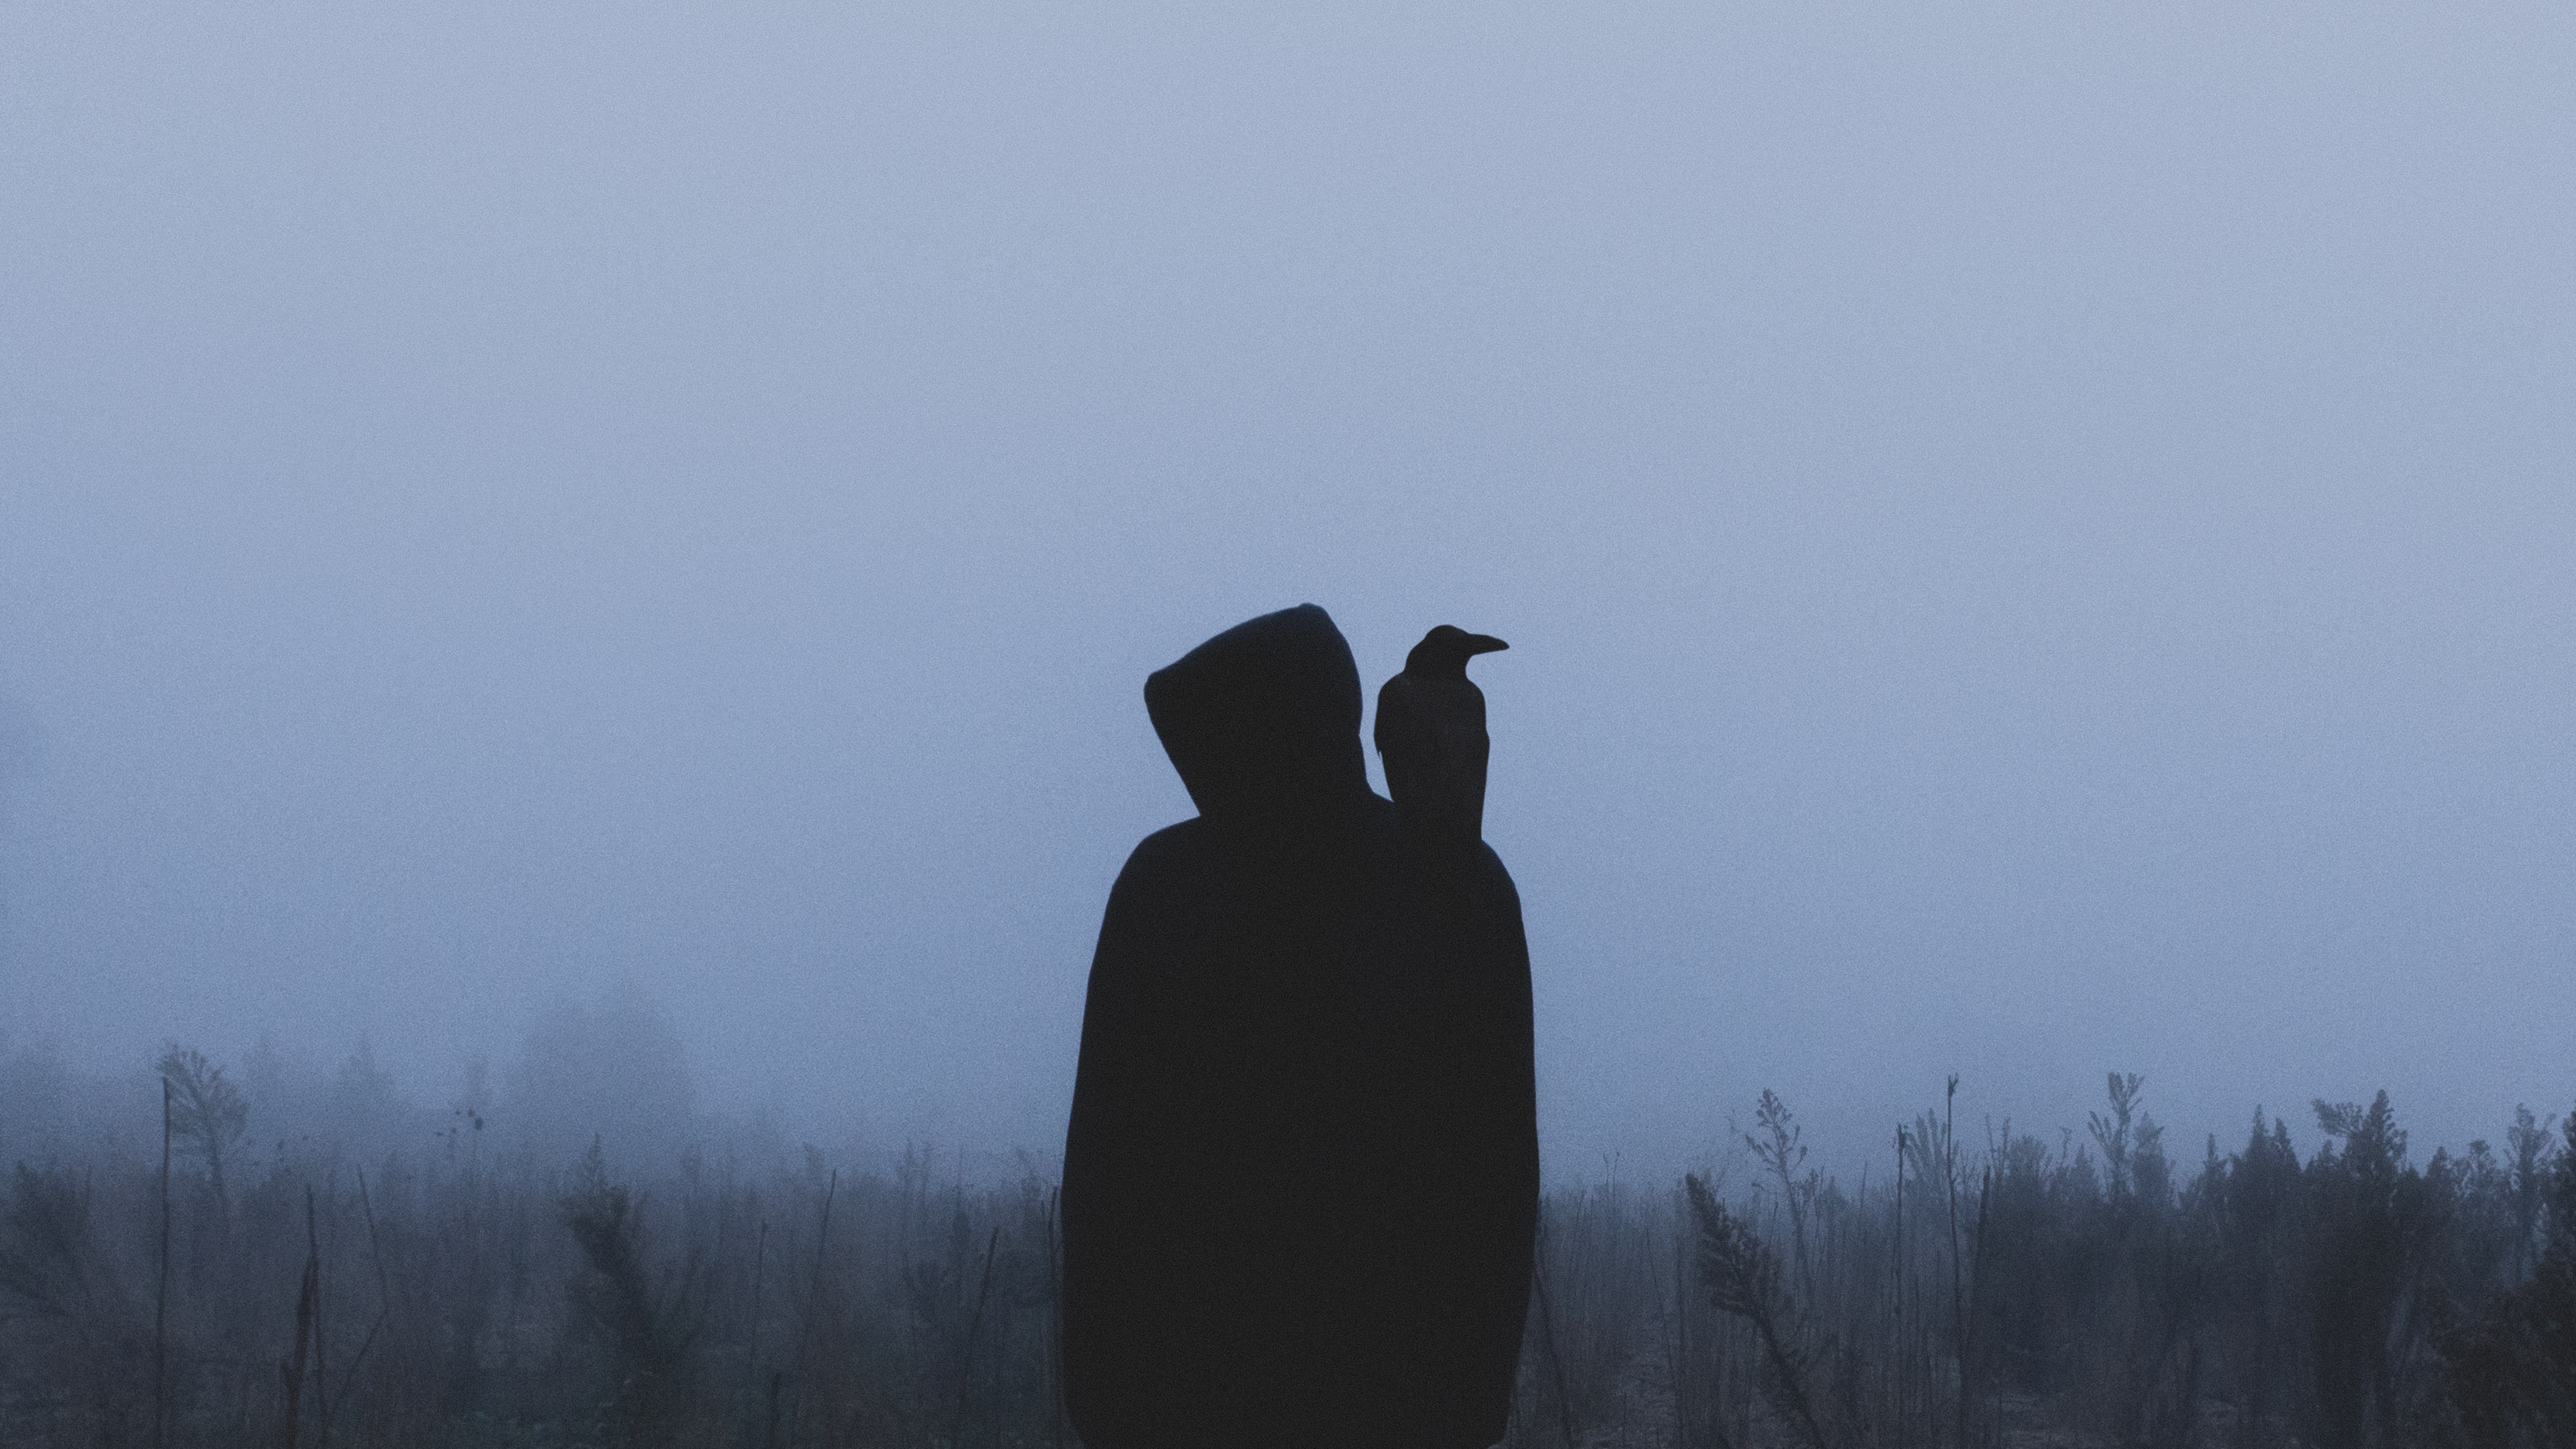 157548 Screensavers and Wallpapers Hood for phone. Download silhouette, miscellanea, miscellaneous, fog, loneliness, hood, raven pictures for free